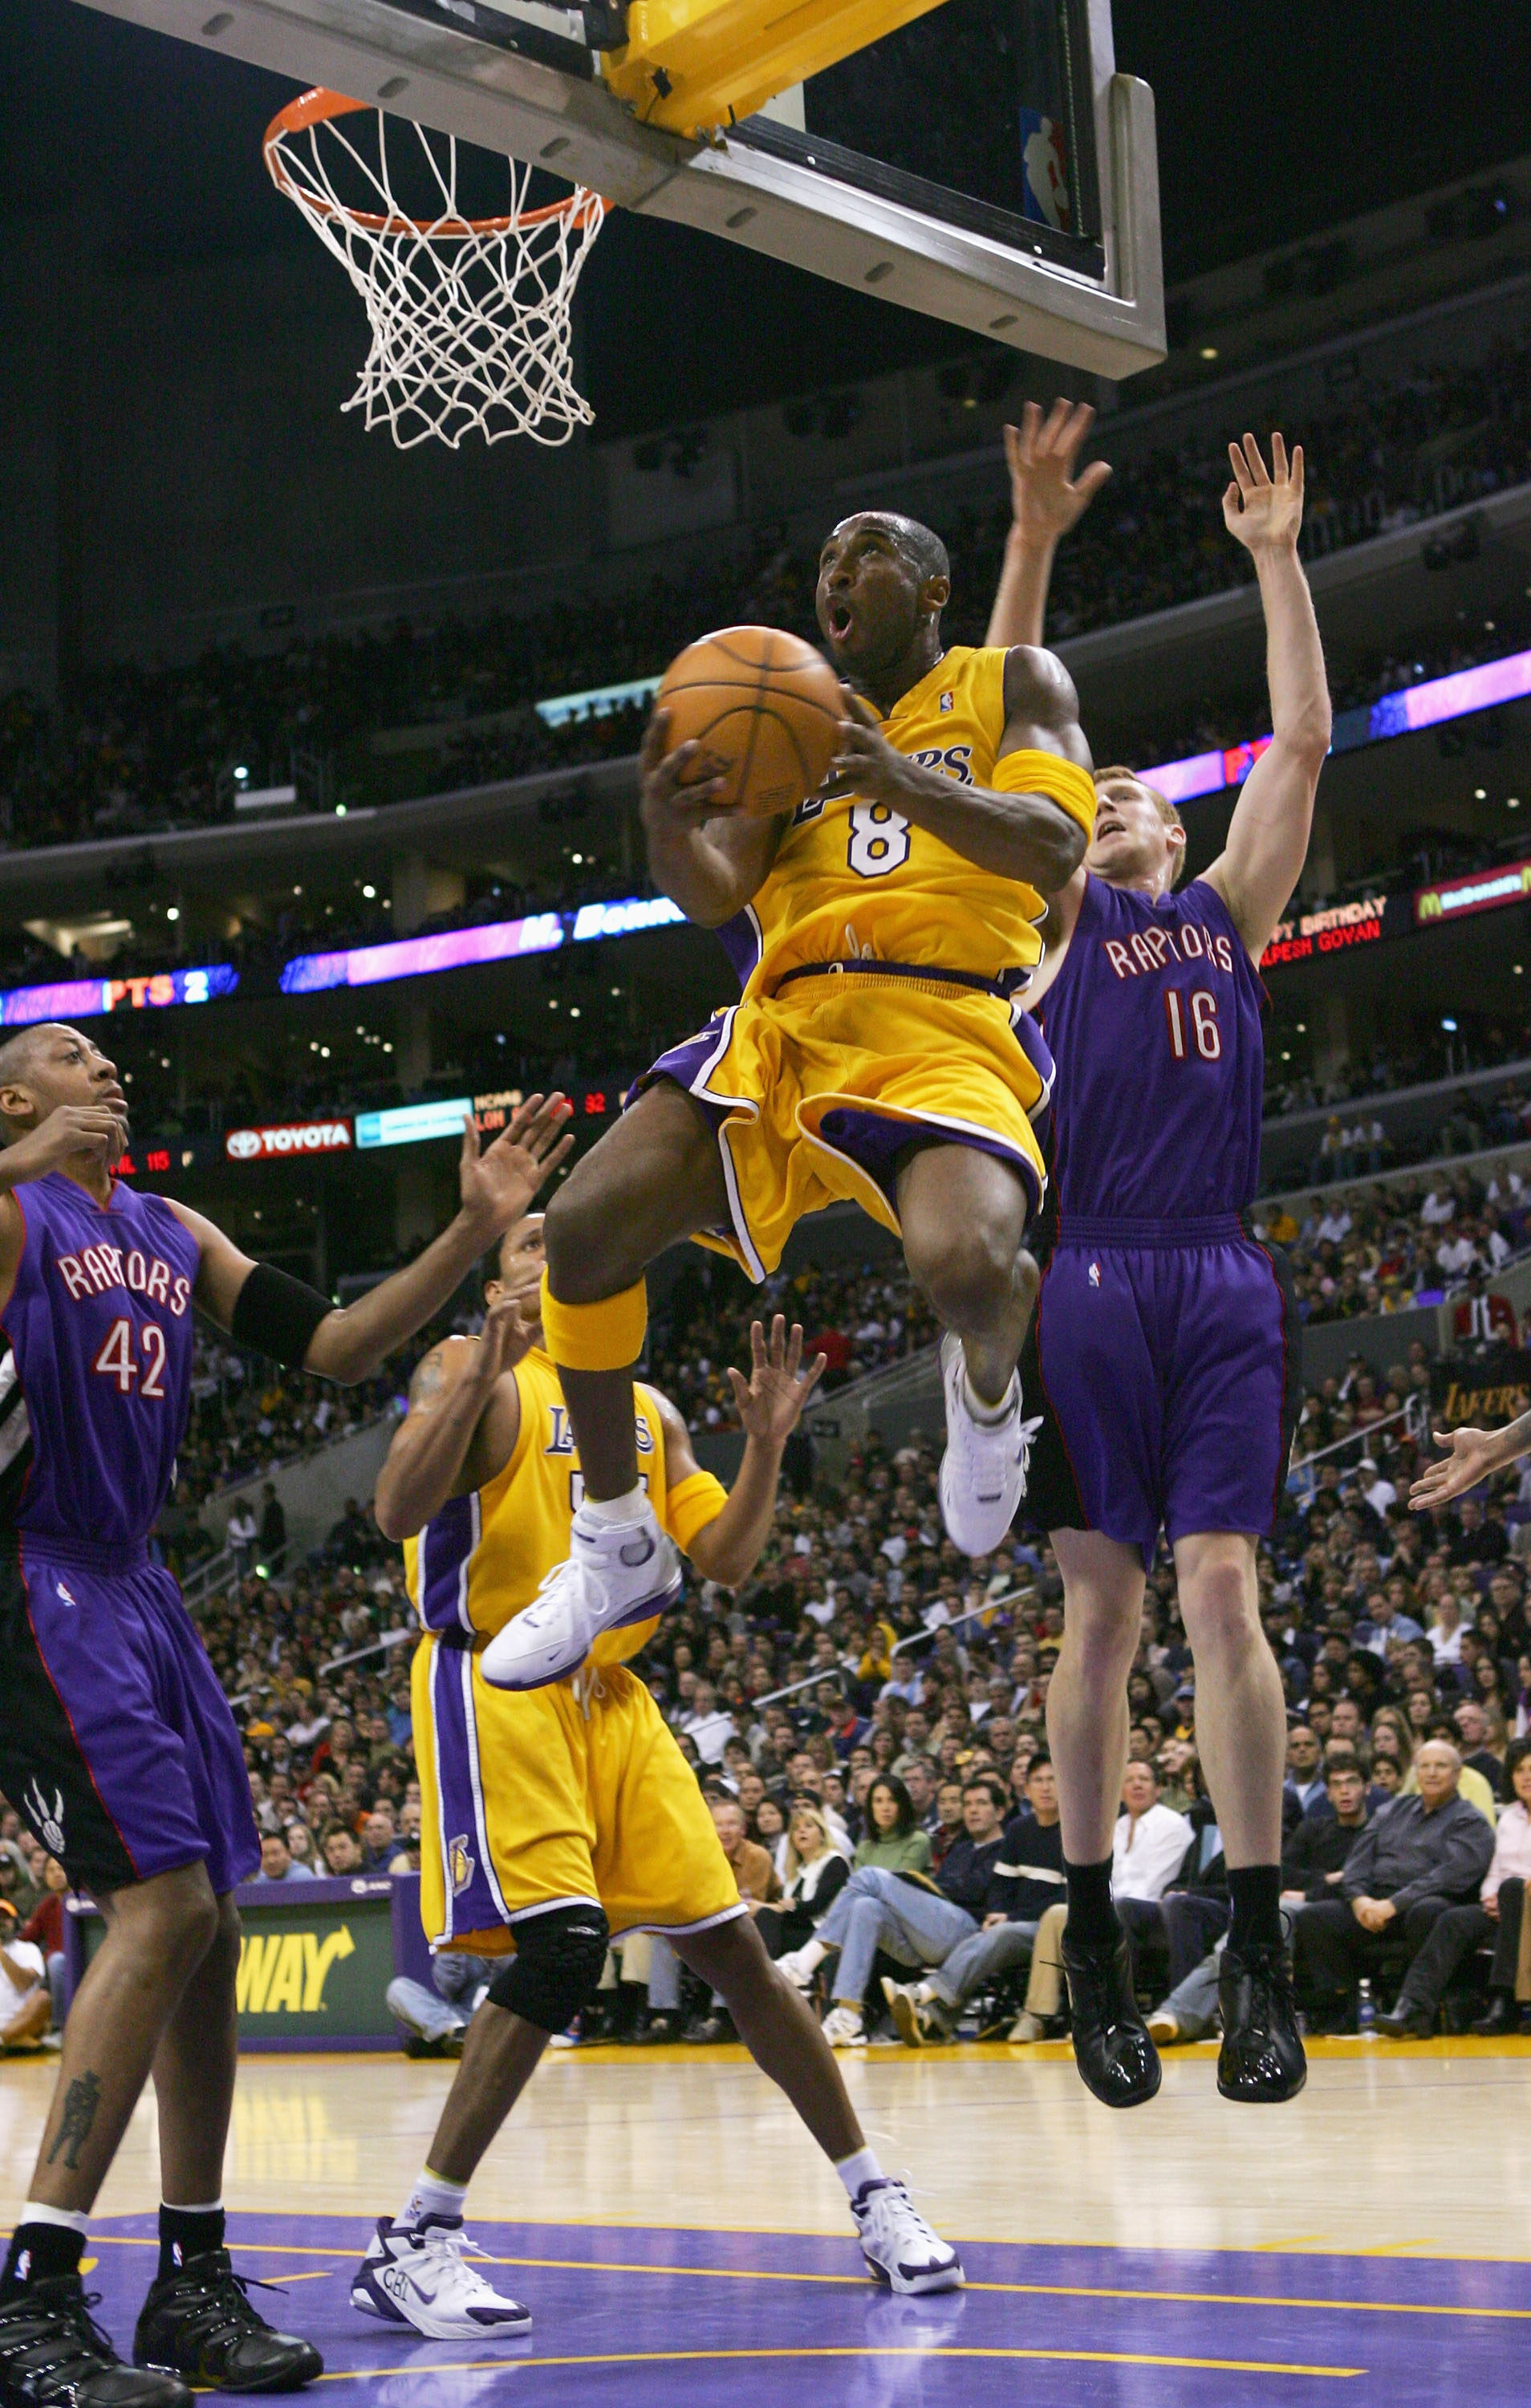 LOS ANGELES - DECEMBER 28:  Kobe Bryant #8 of the Los Angeles Lakers drives to the basket past Matt Bonner #16 of theToronto Raptors during the game on December 28, 2004 at Staples Center in Los Angeles, California.  The Lakers defeated the Raptors 117-99